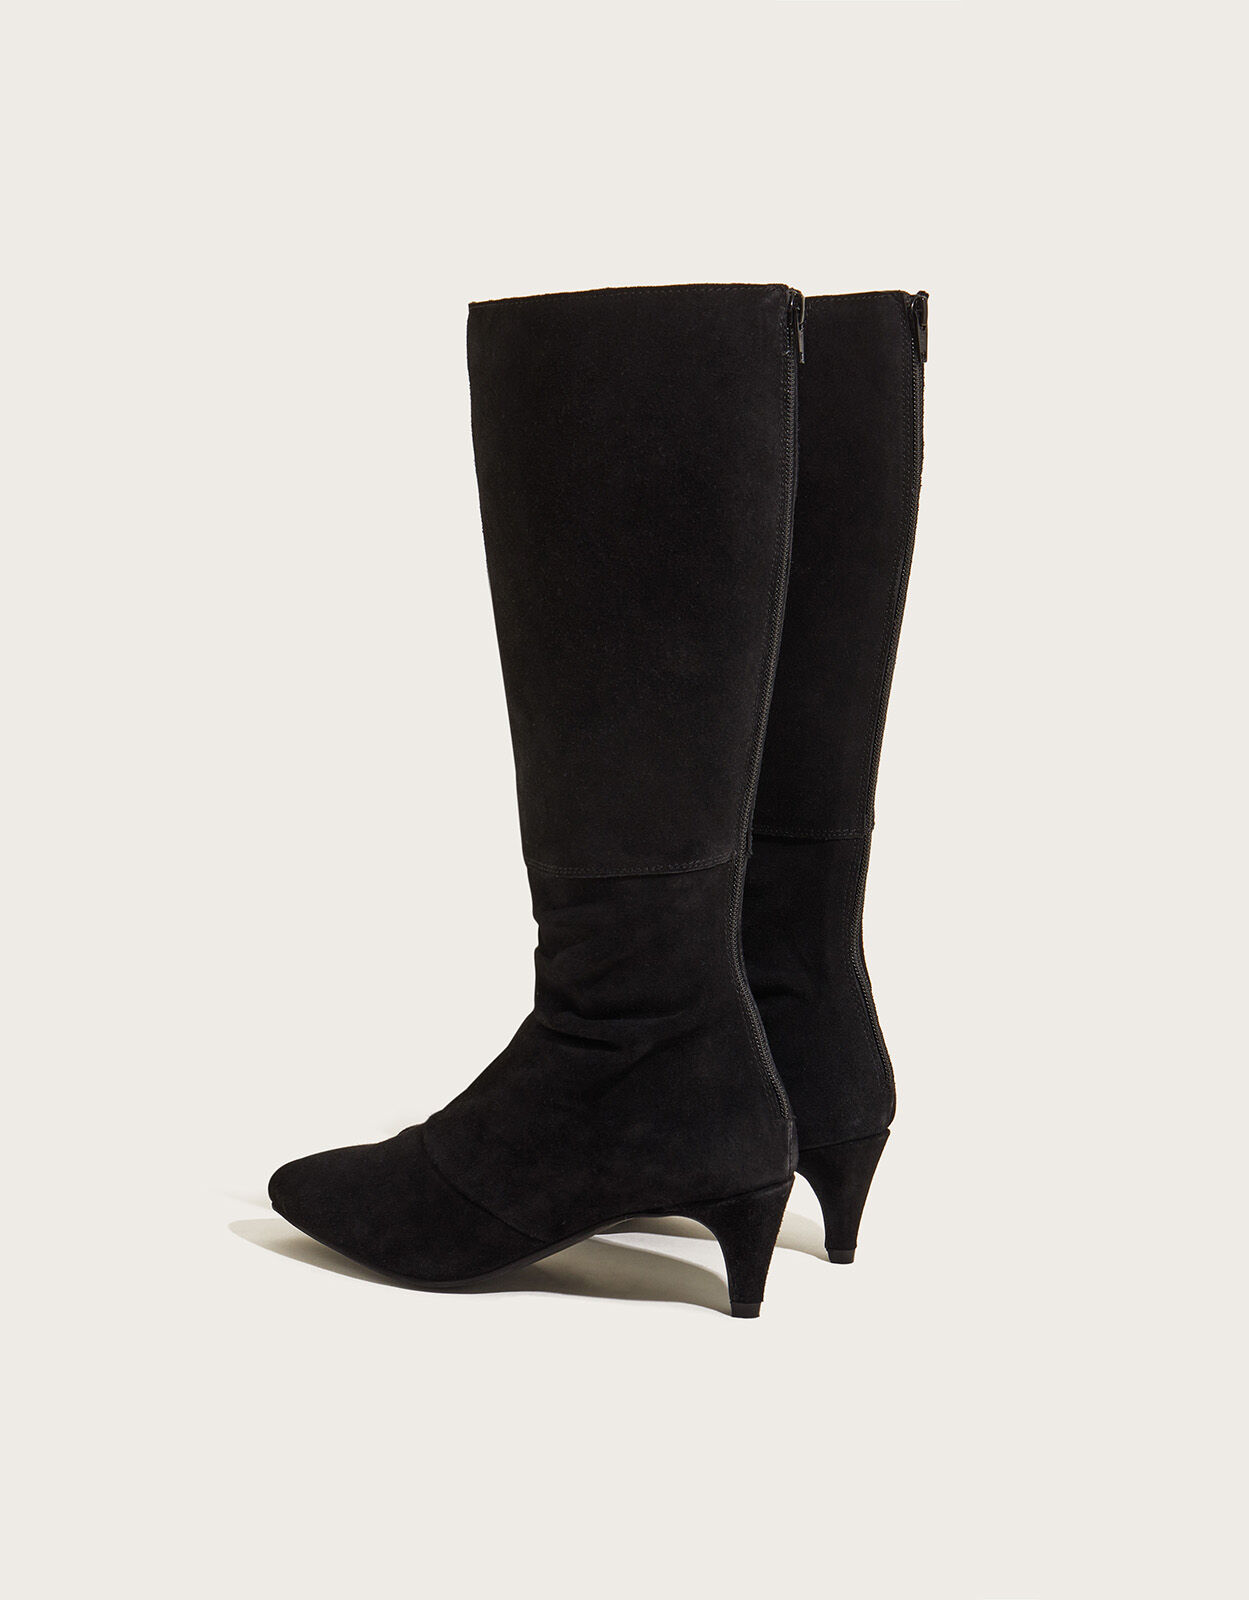 Montage Slouch Boot (Black) – Stepping Pretty Shoe Boutique, LLC